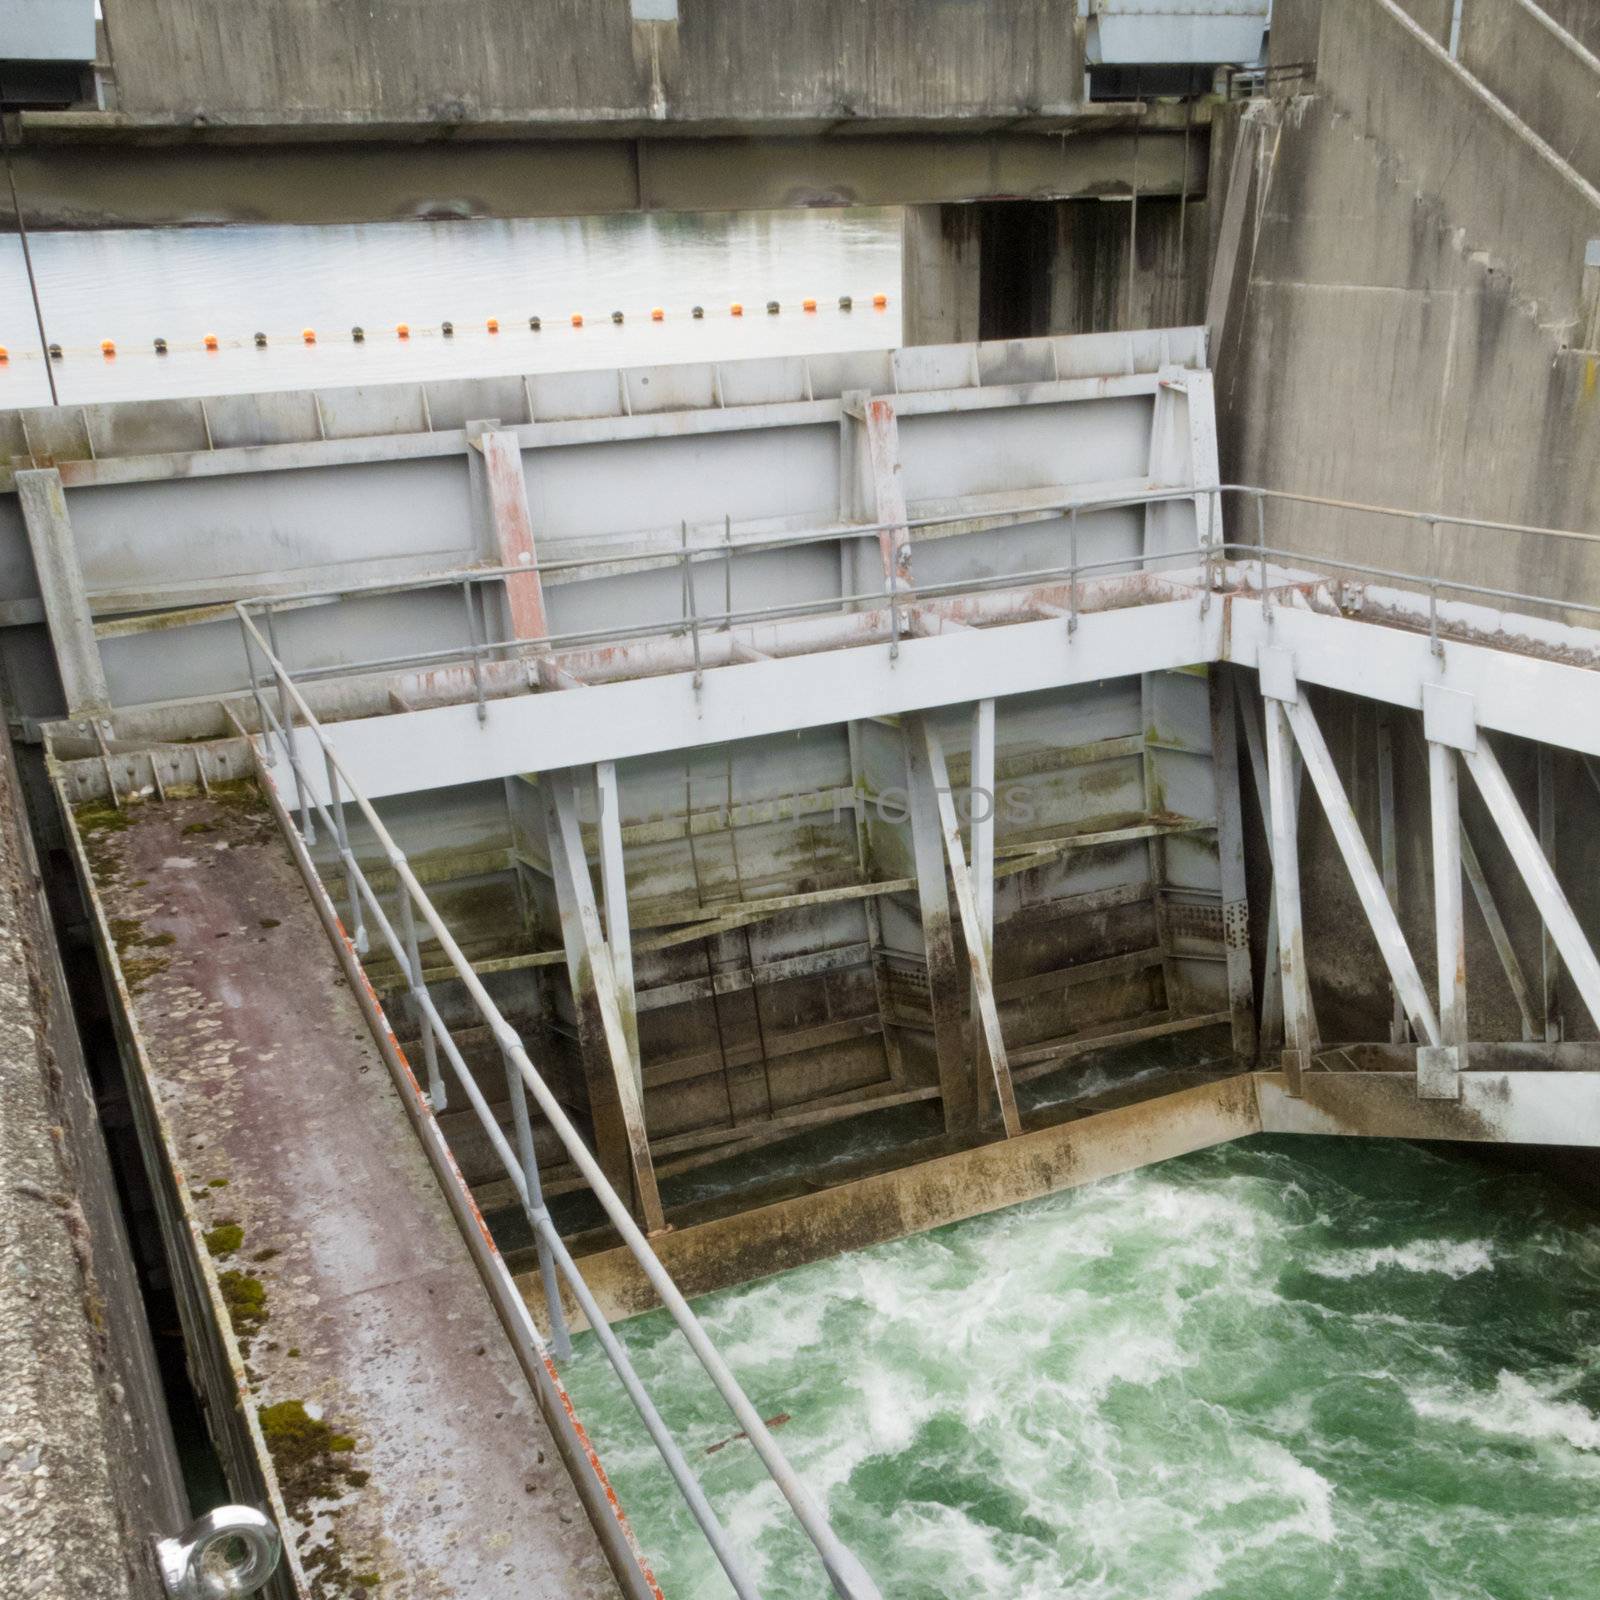 Hydro control structure weir with flow passing underneath causing a violent turbulence discharge of white water